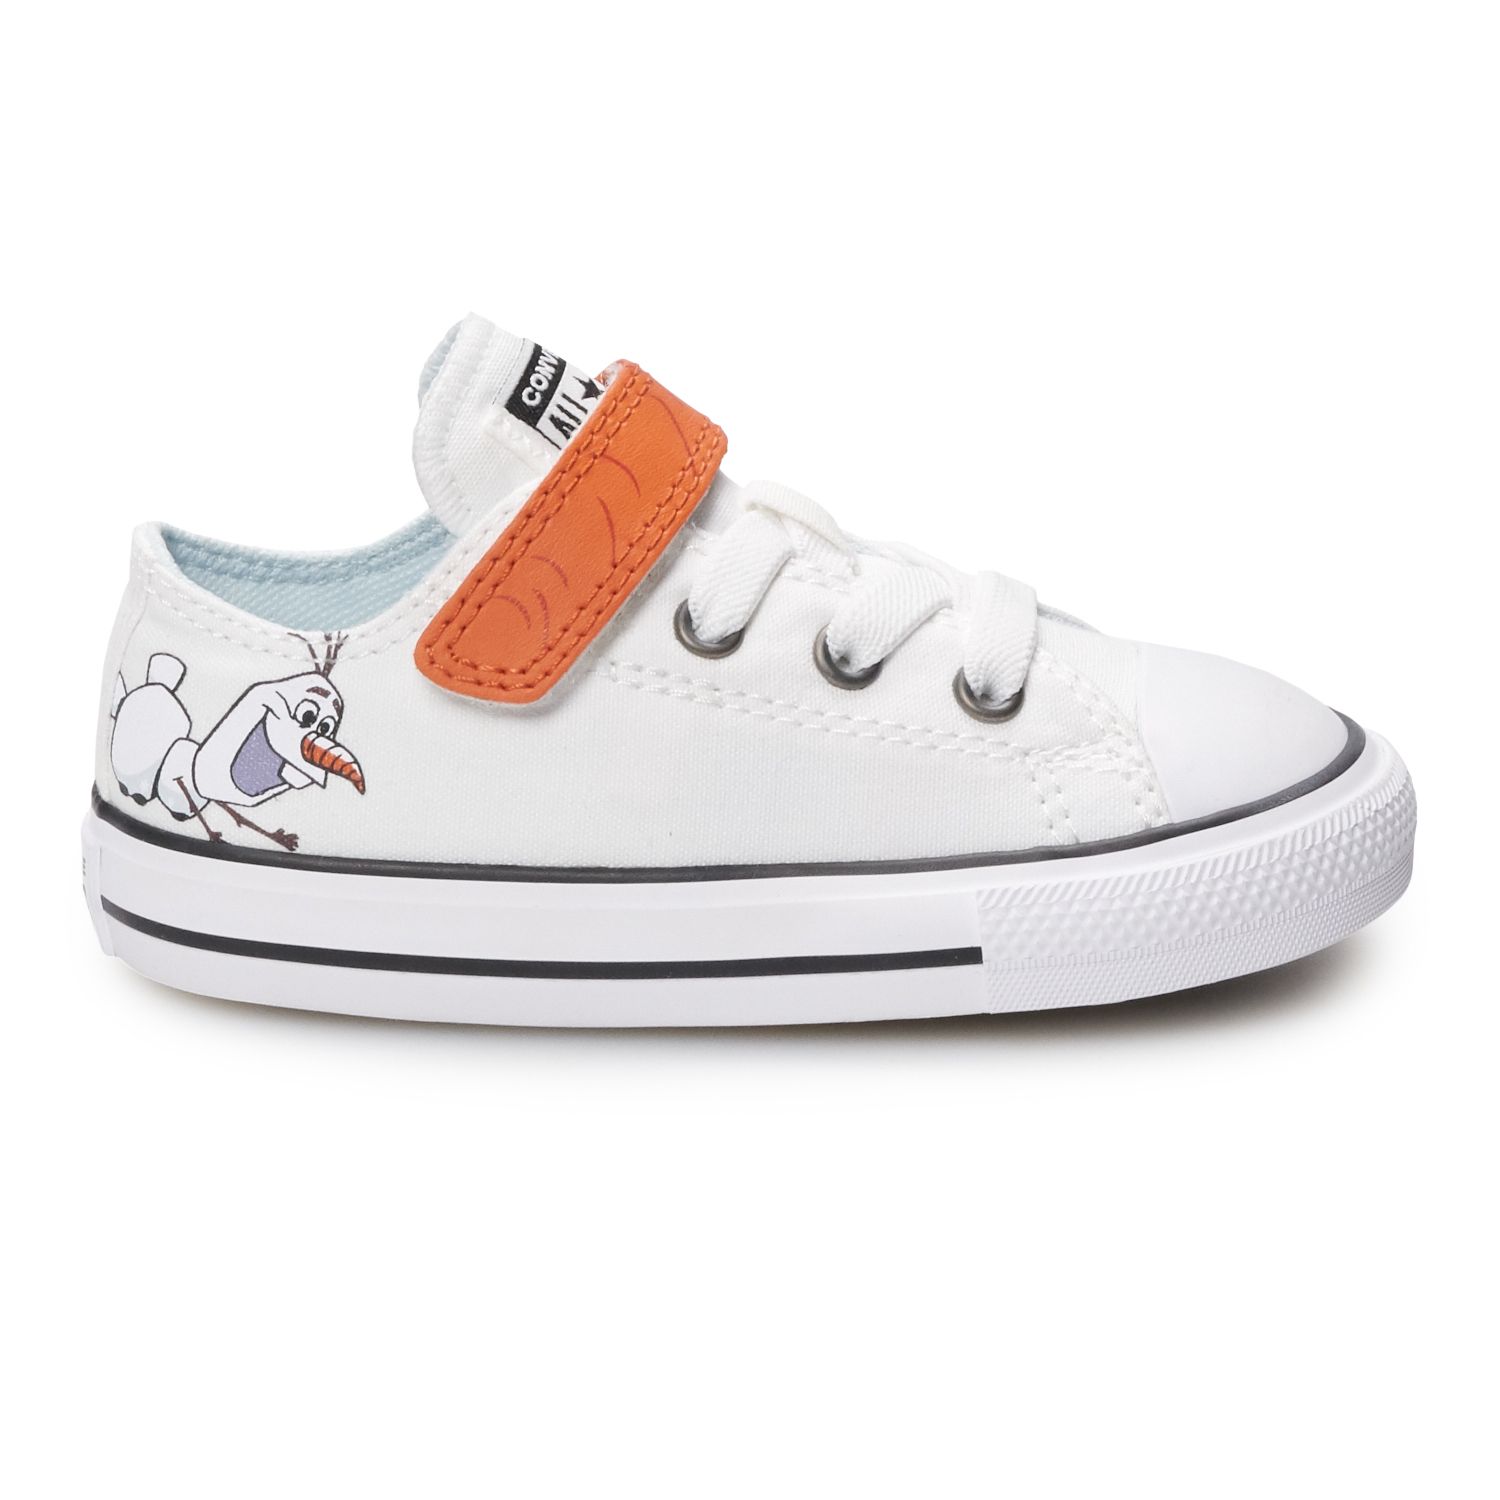 disney character converse shoes